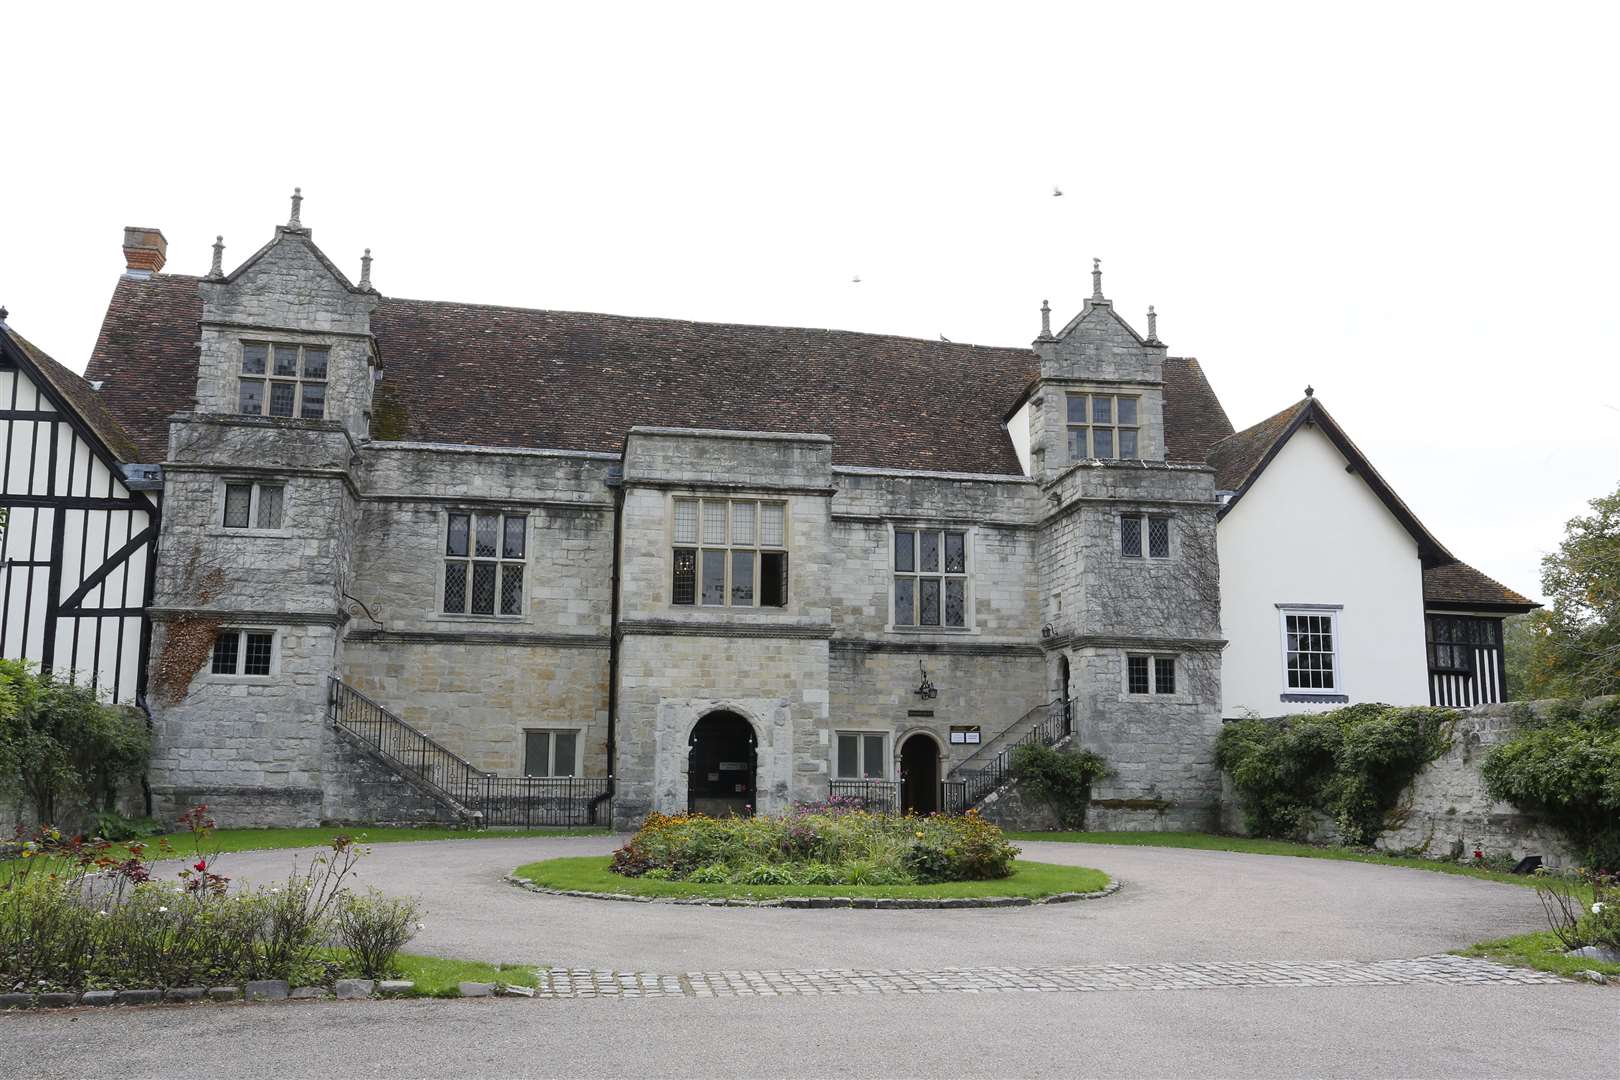 The inquest was heard at the Archbishop’s Palace in Maidstone